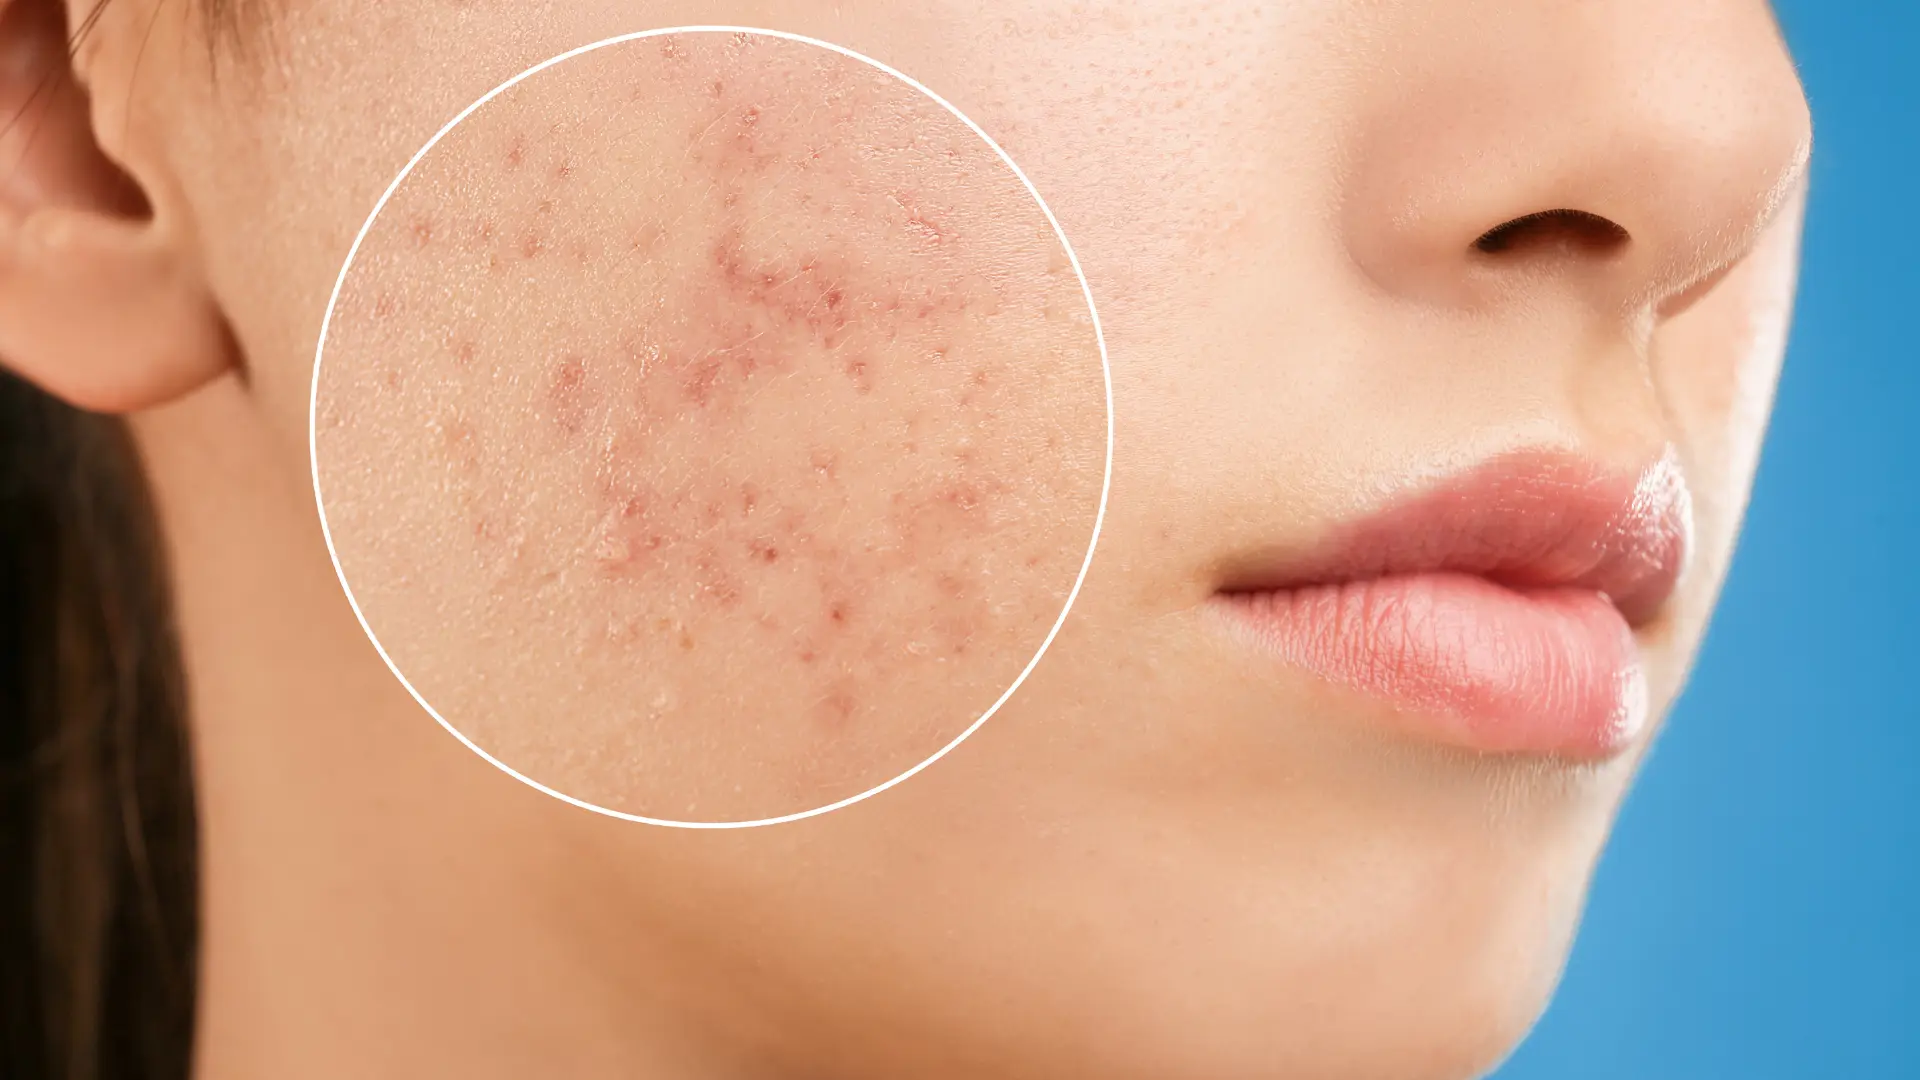 How To Treat Dry Acne-Prone Skin In The Winter